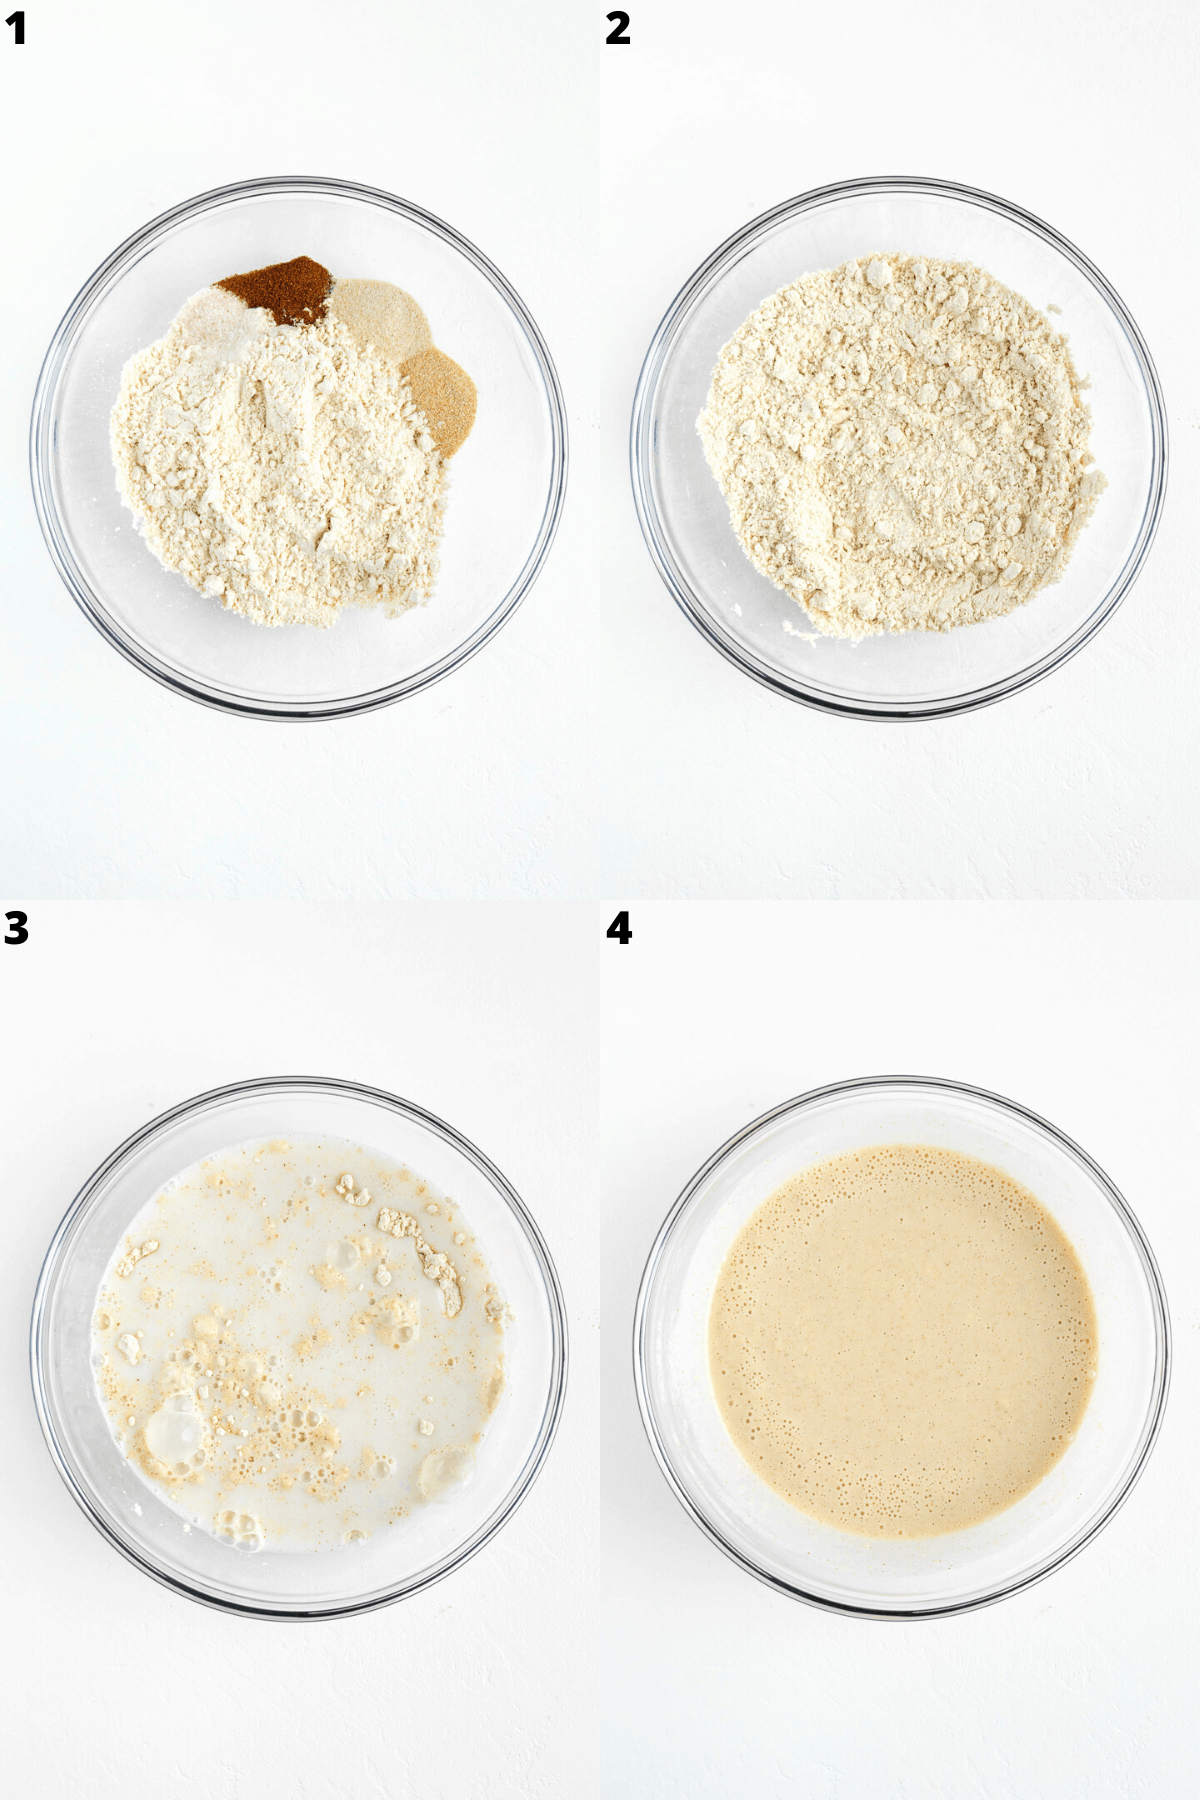 mixing flour, spices, and almond milk together in a glass bowl